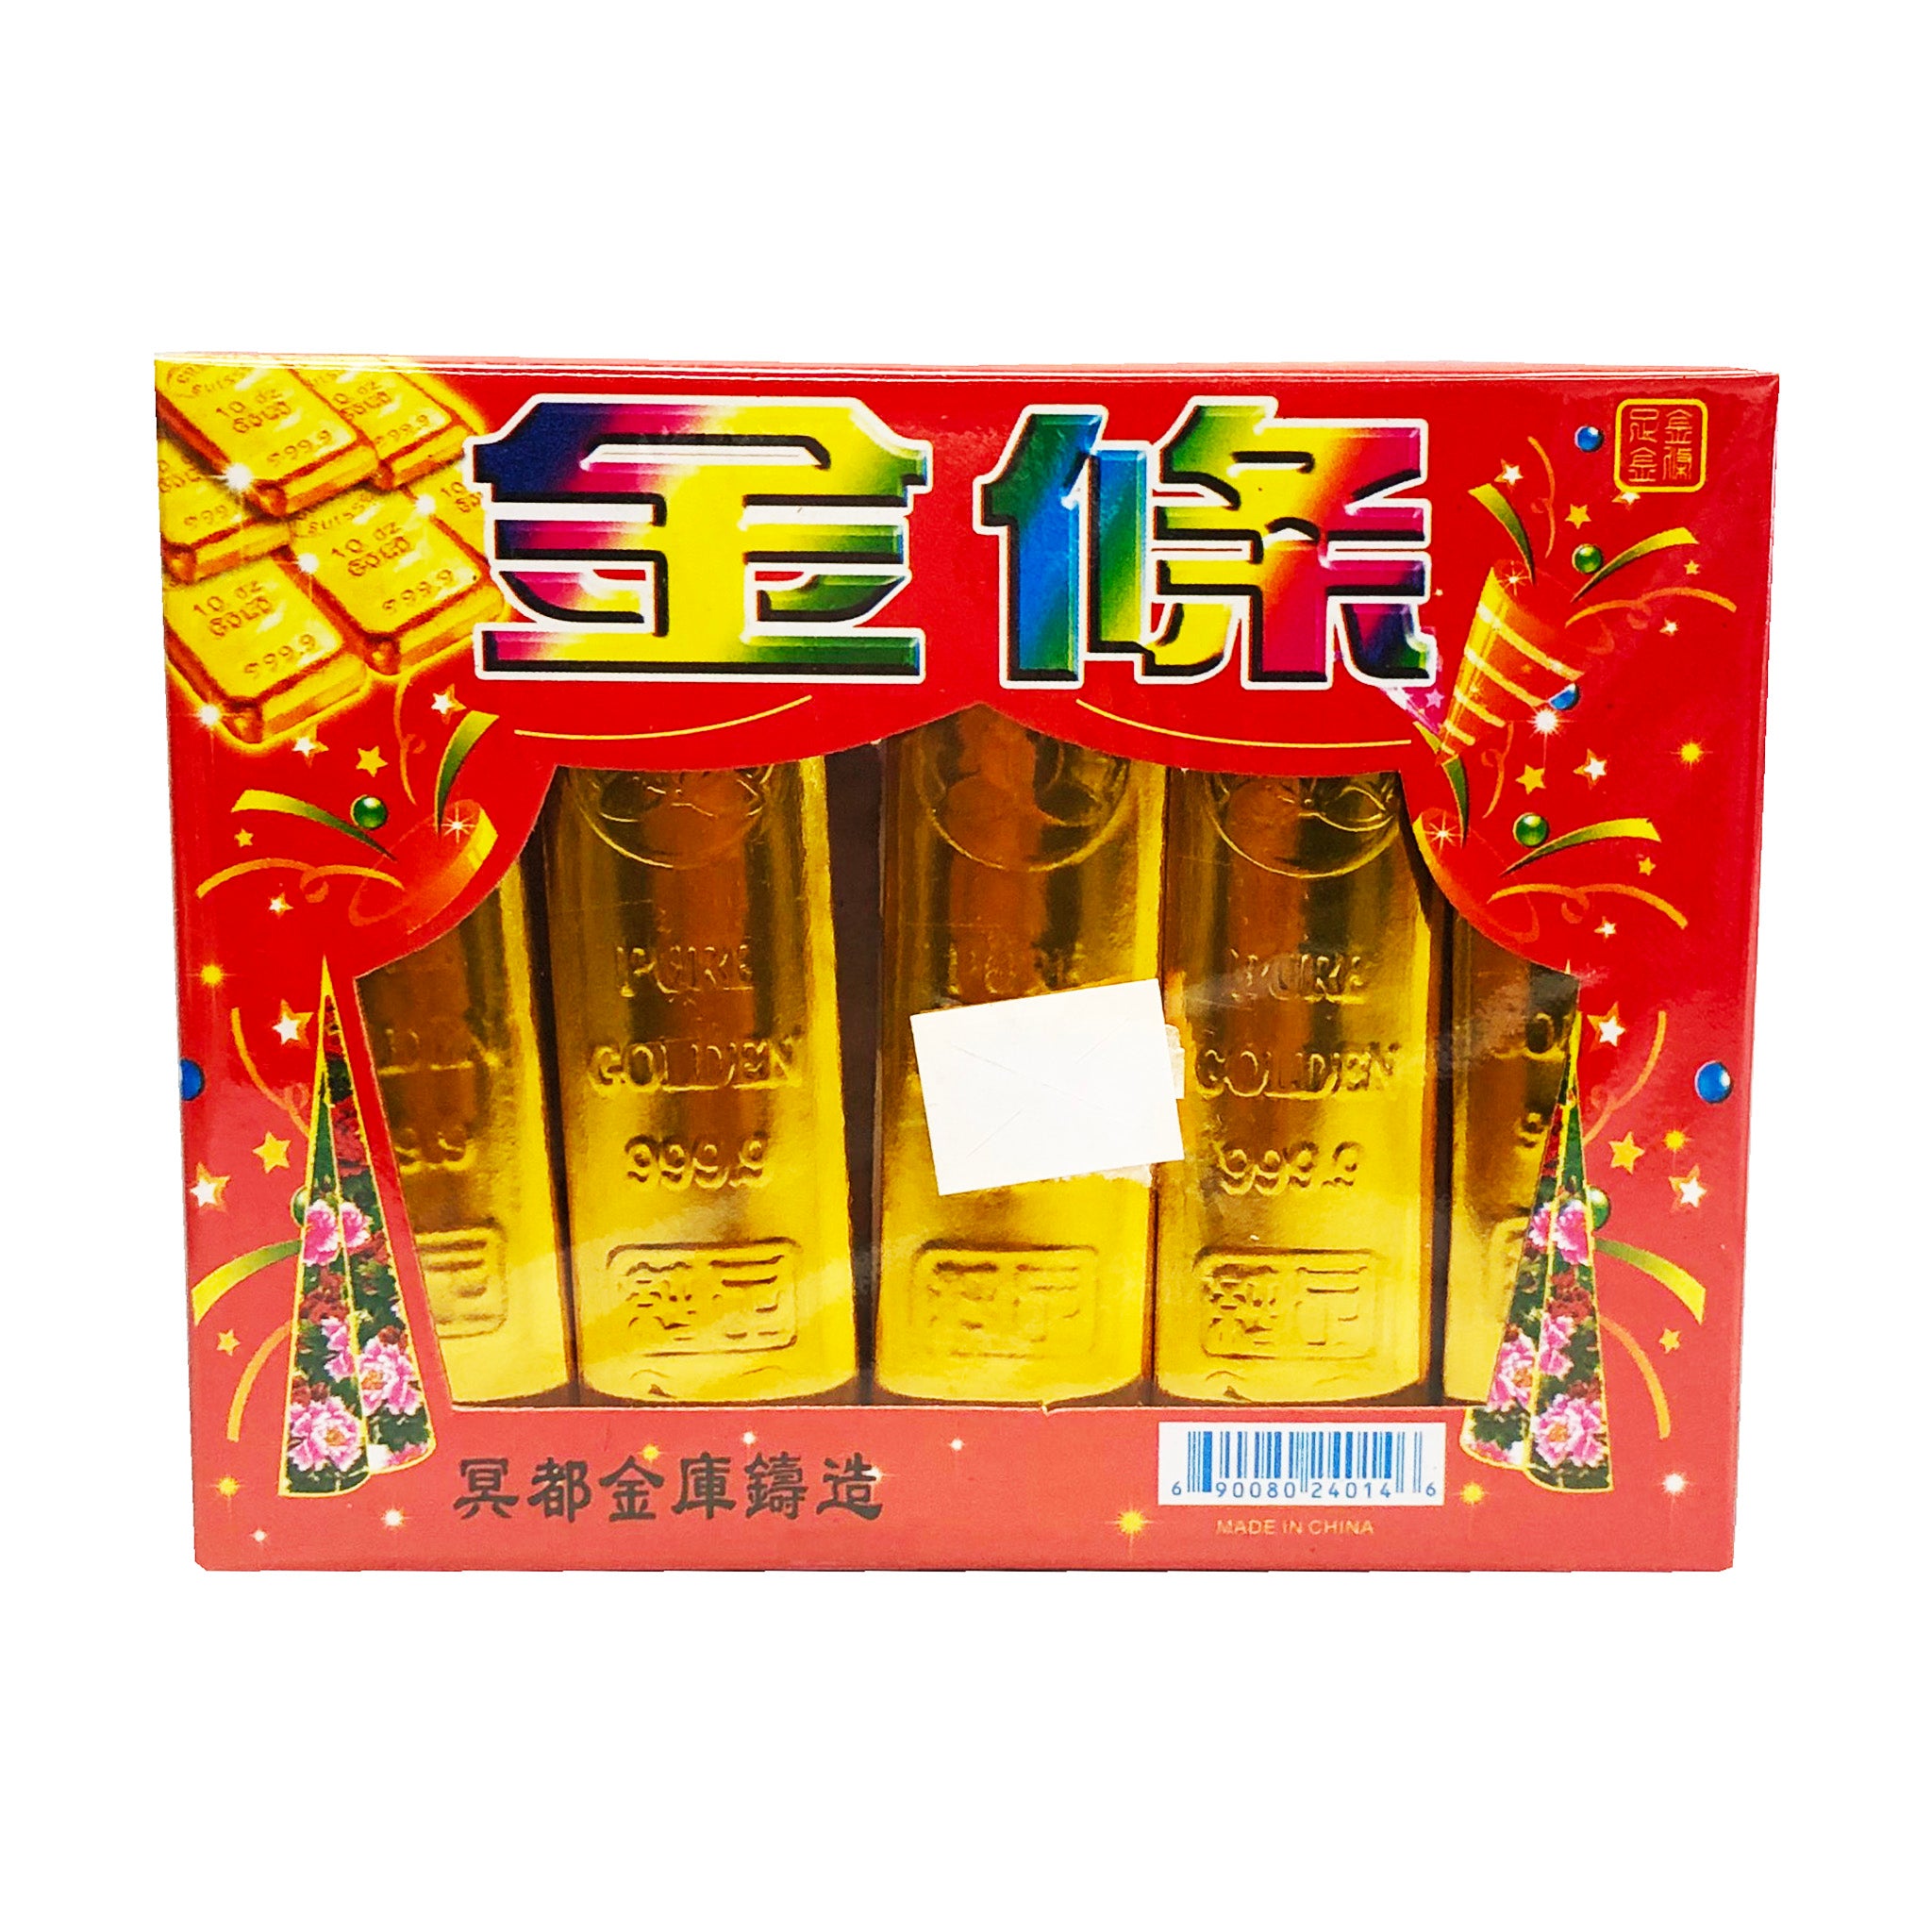 Chee Shing Chinese Joss Paper - Gold Bar - Just Asian Food